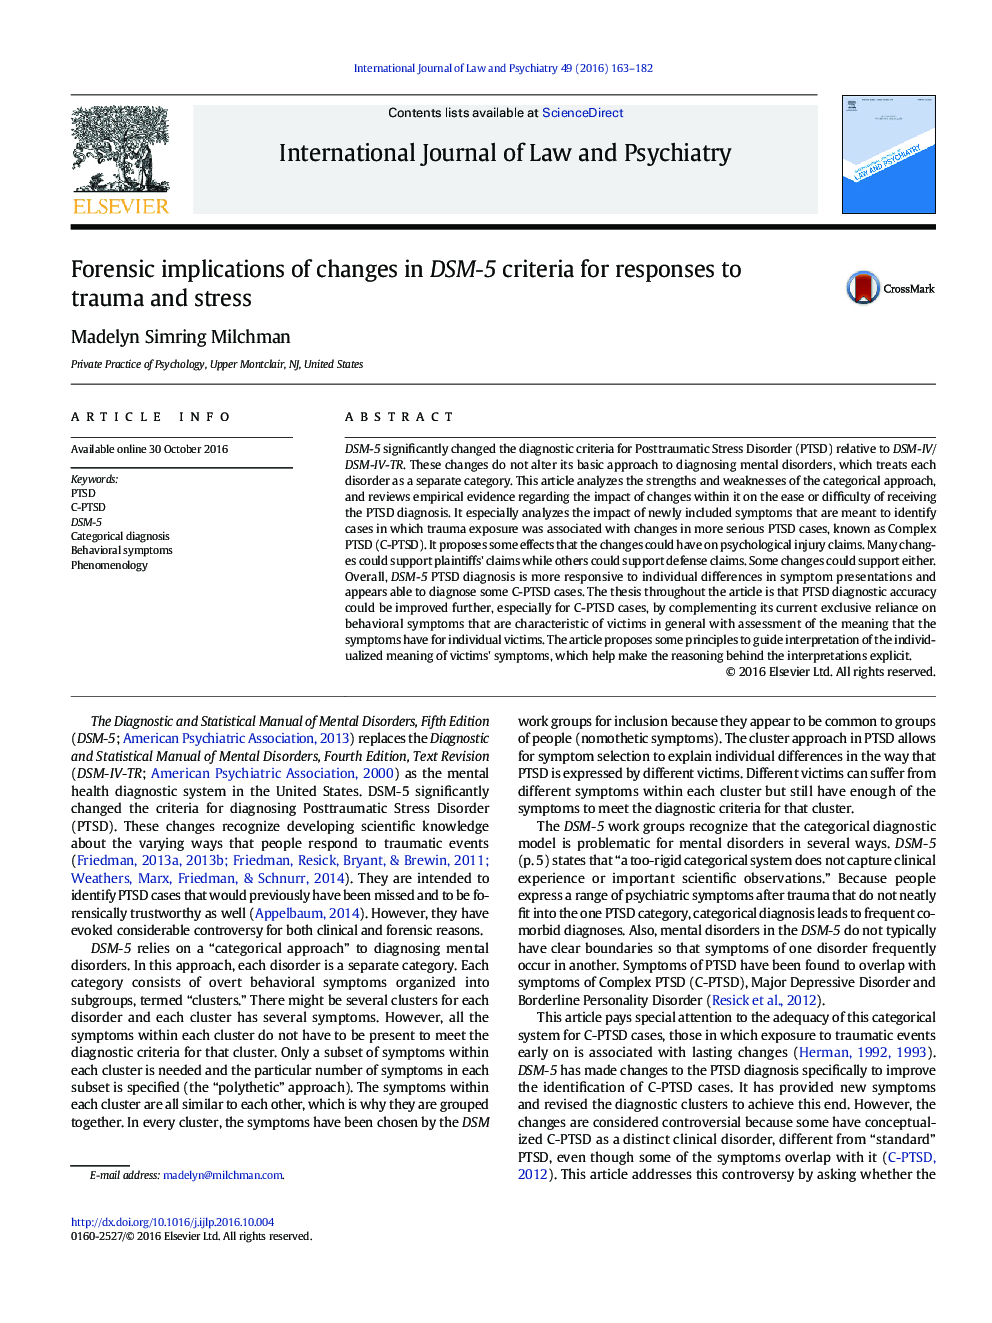 Forensic implications of changes in DSM-5 criteria for responses to trauma and stress